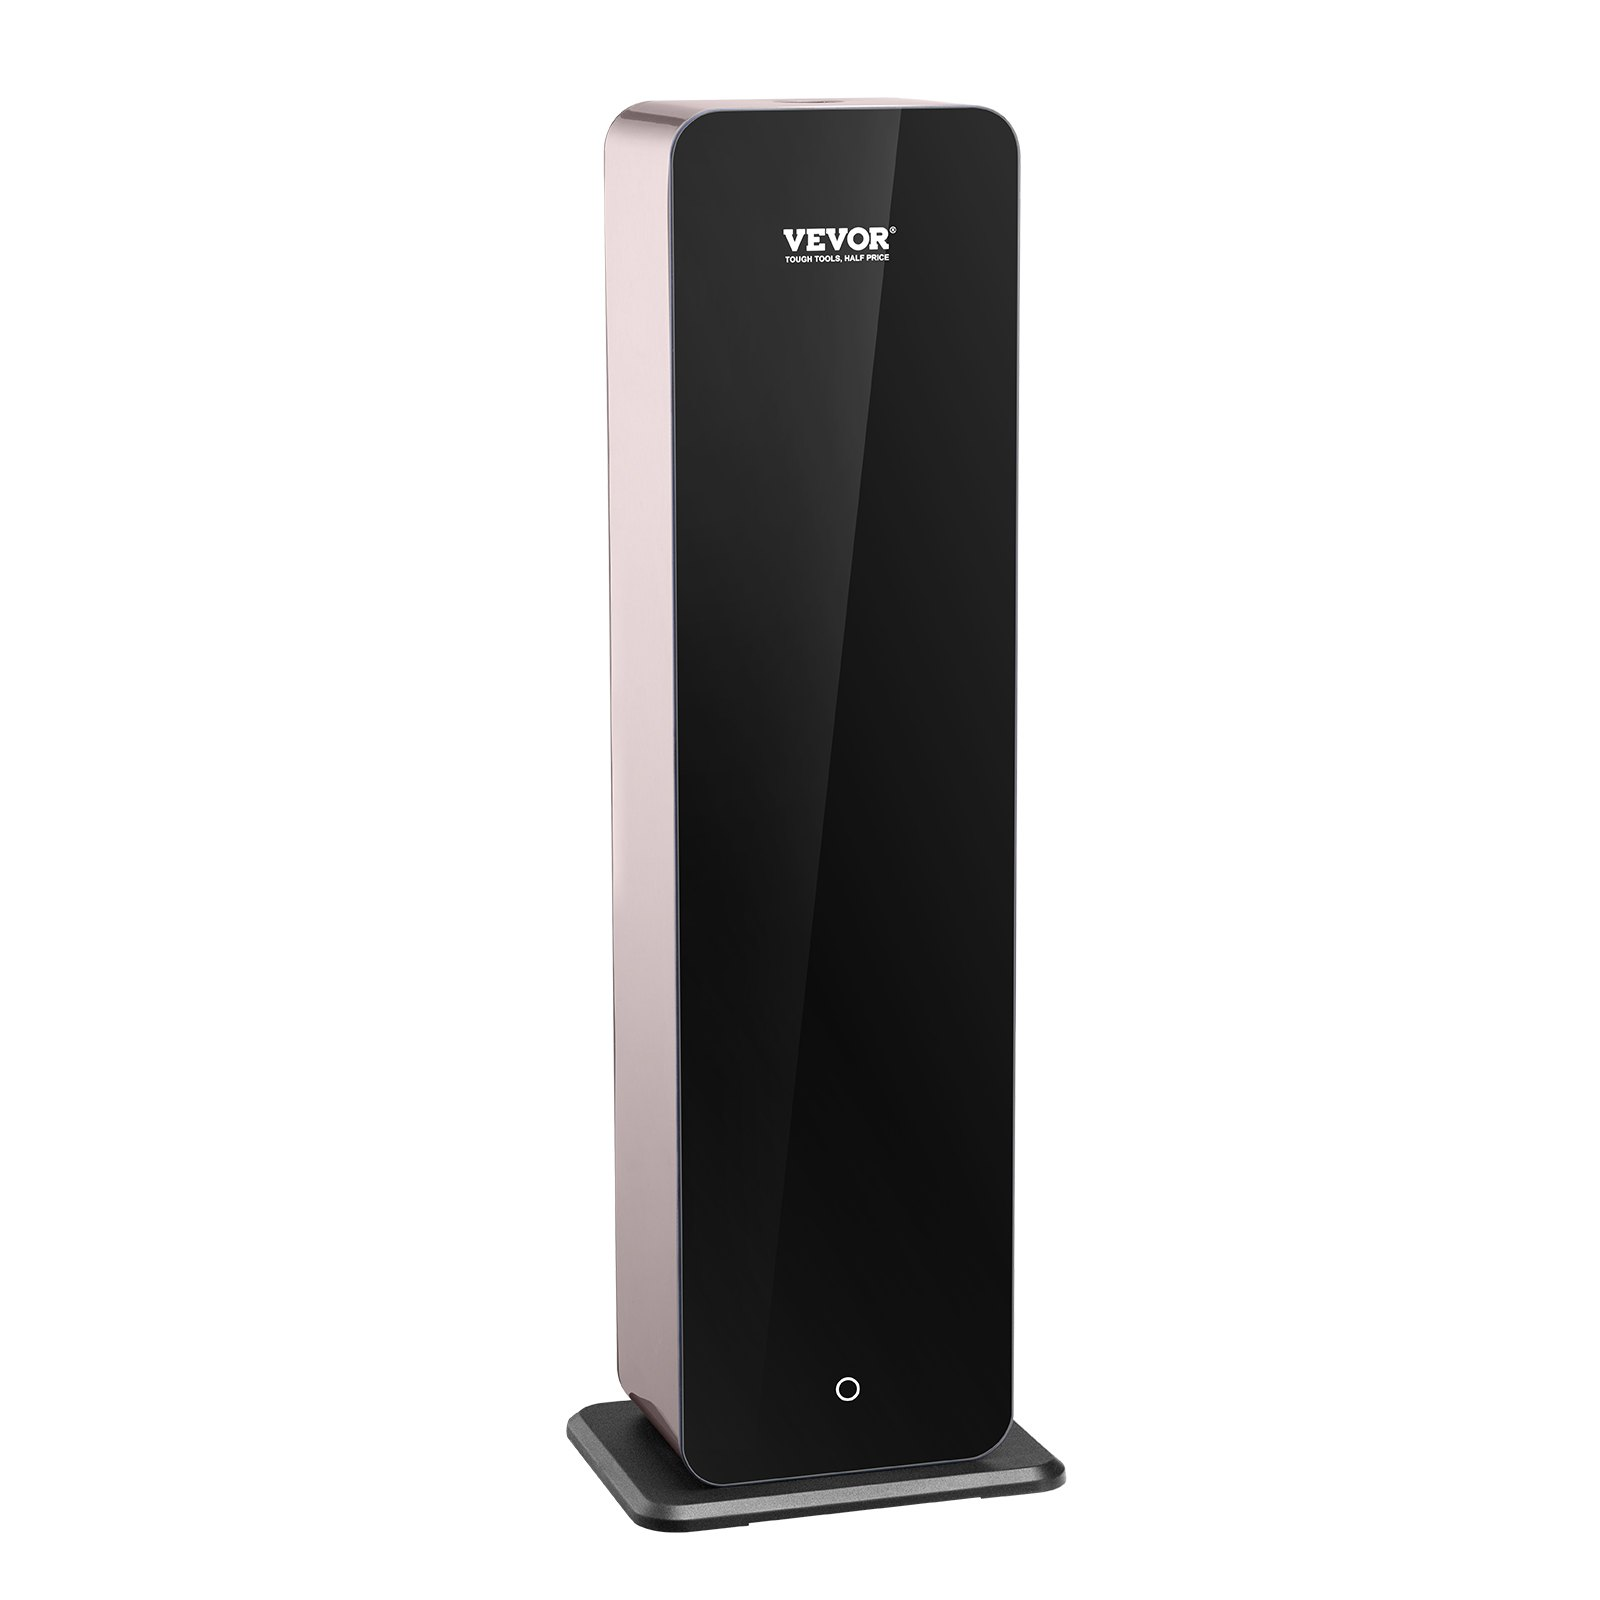 VEVOR Scent Air Machine for Home, 950ml Bluetooth Smart Cold Air Diffuser, 3000sq.ft Waterless Essential Oil Scent Air Diffuser, Floor Standing Aromatherapy Machine for Large Room, Office, Hotel, Goodies N Stuff